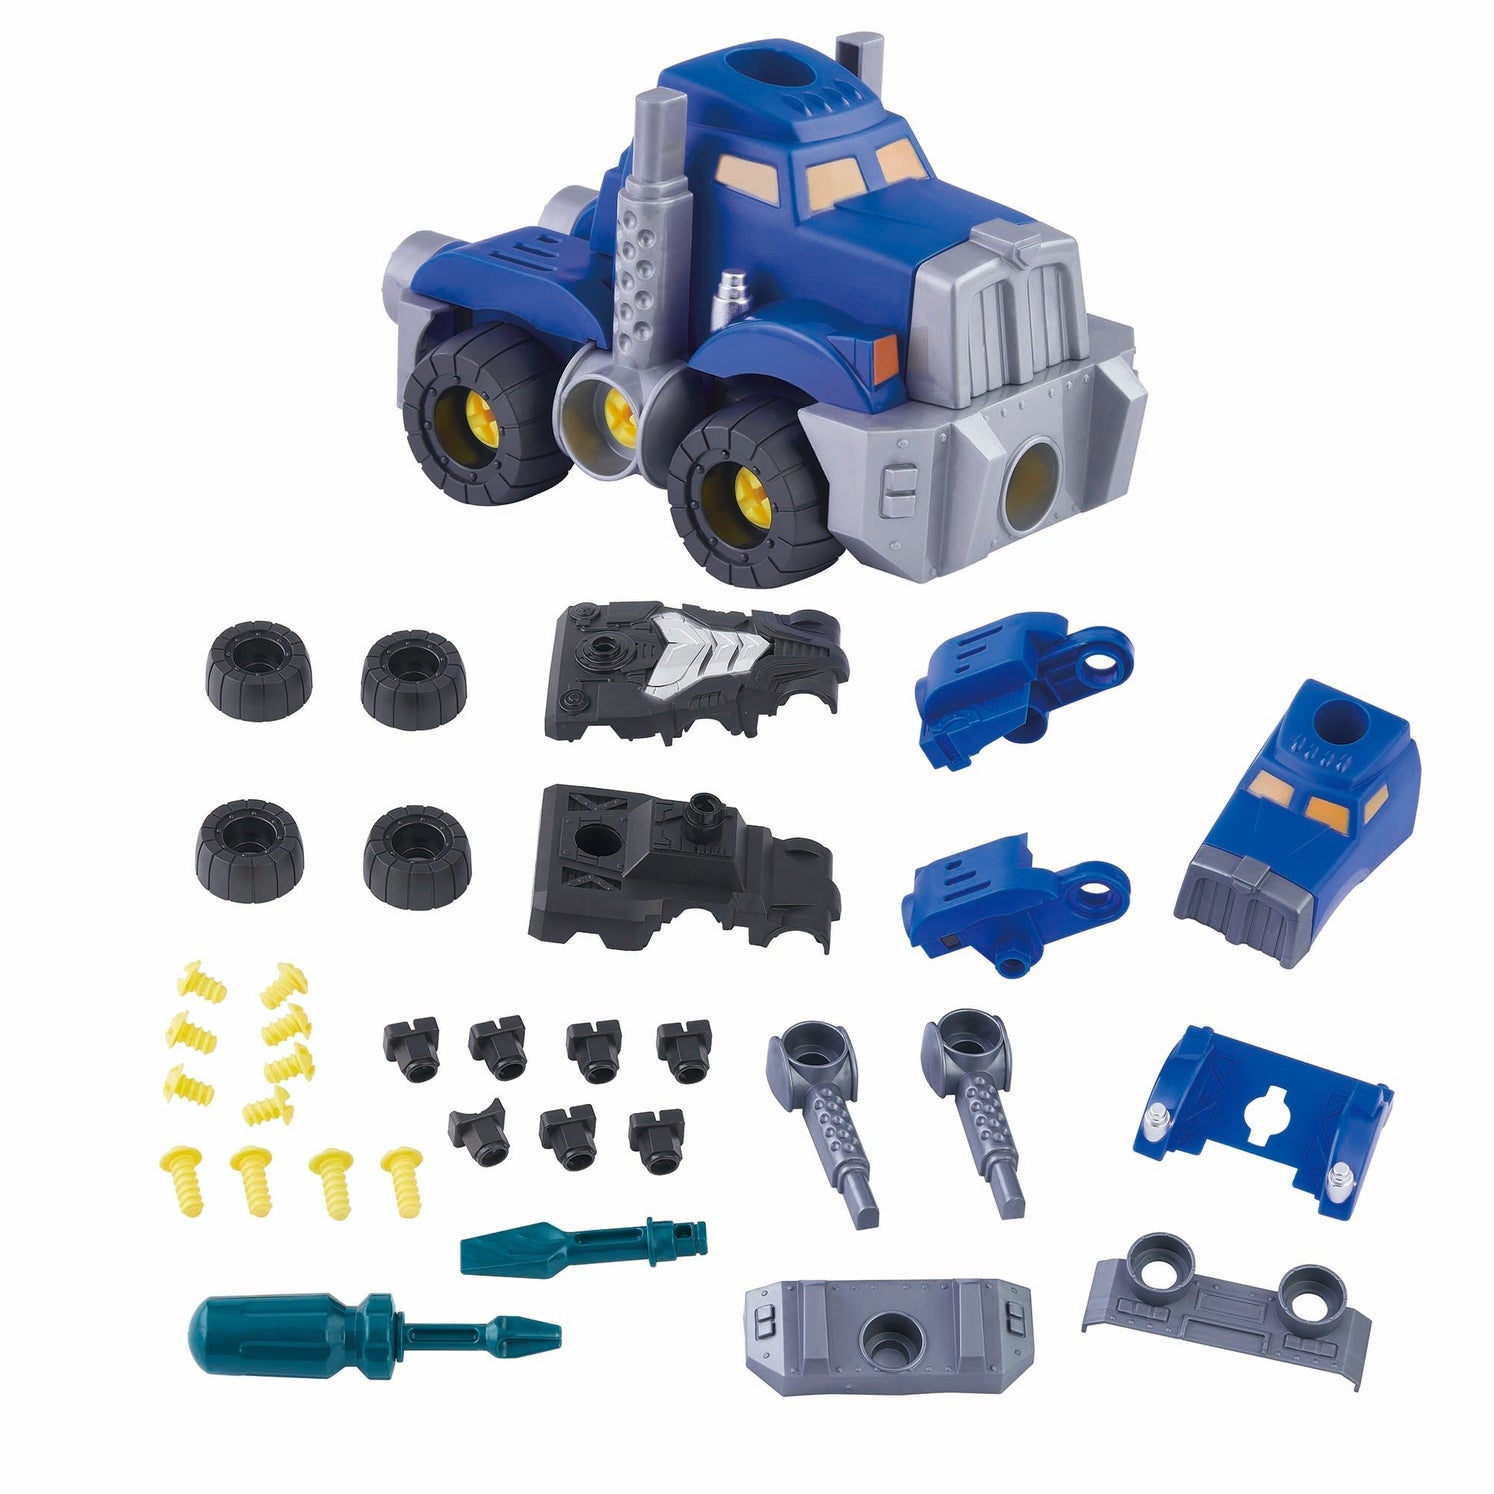 Build Your Own Vehicle Set - Twinkle Twinkle Little One